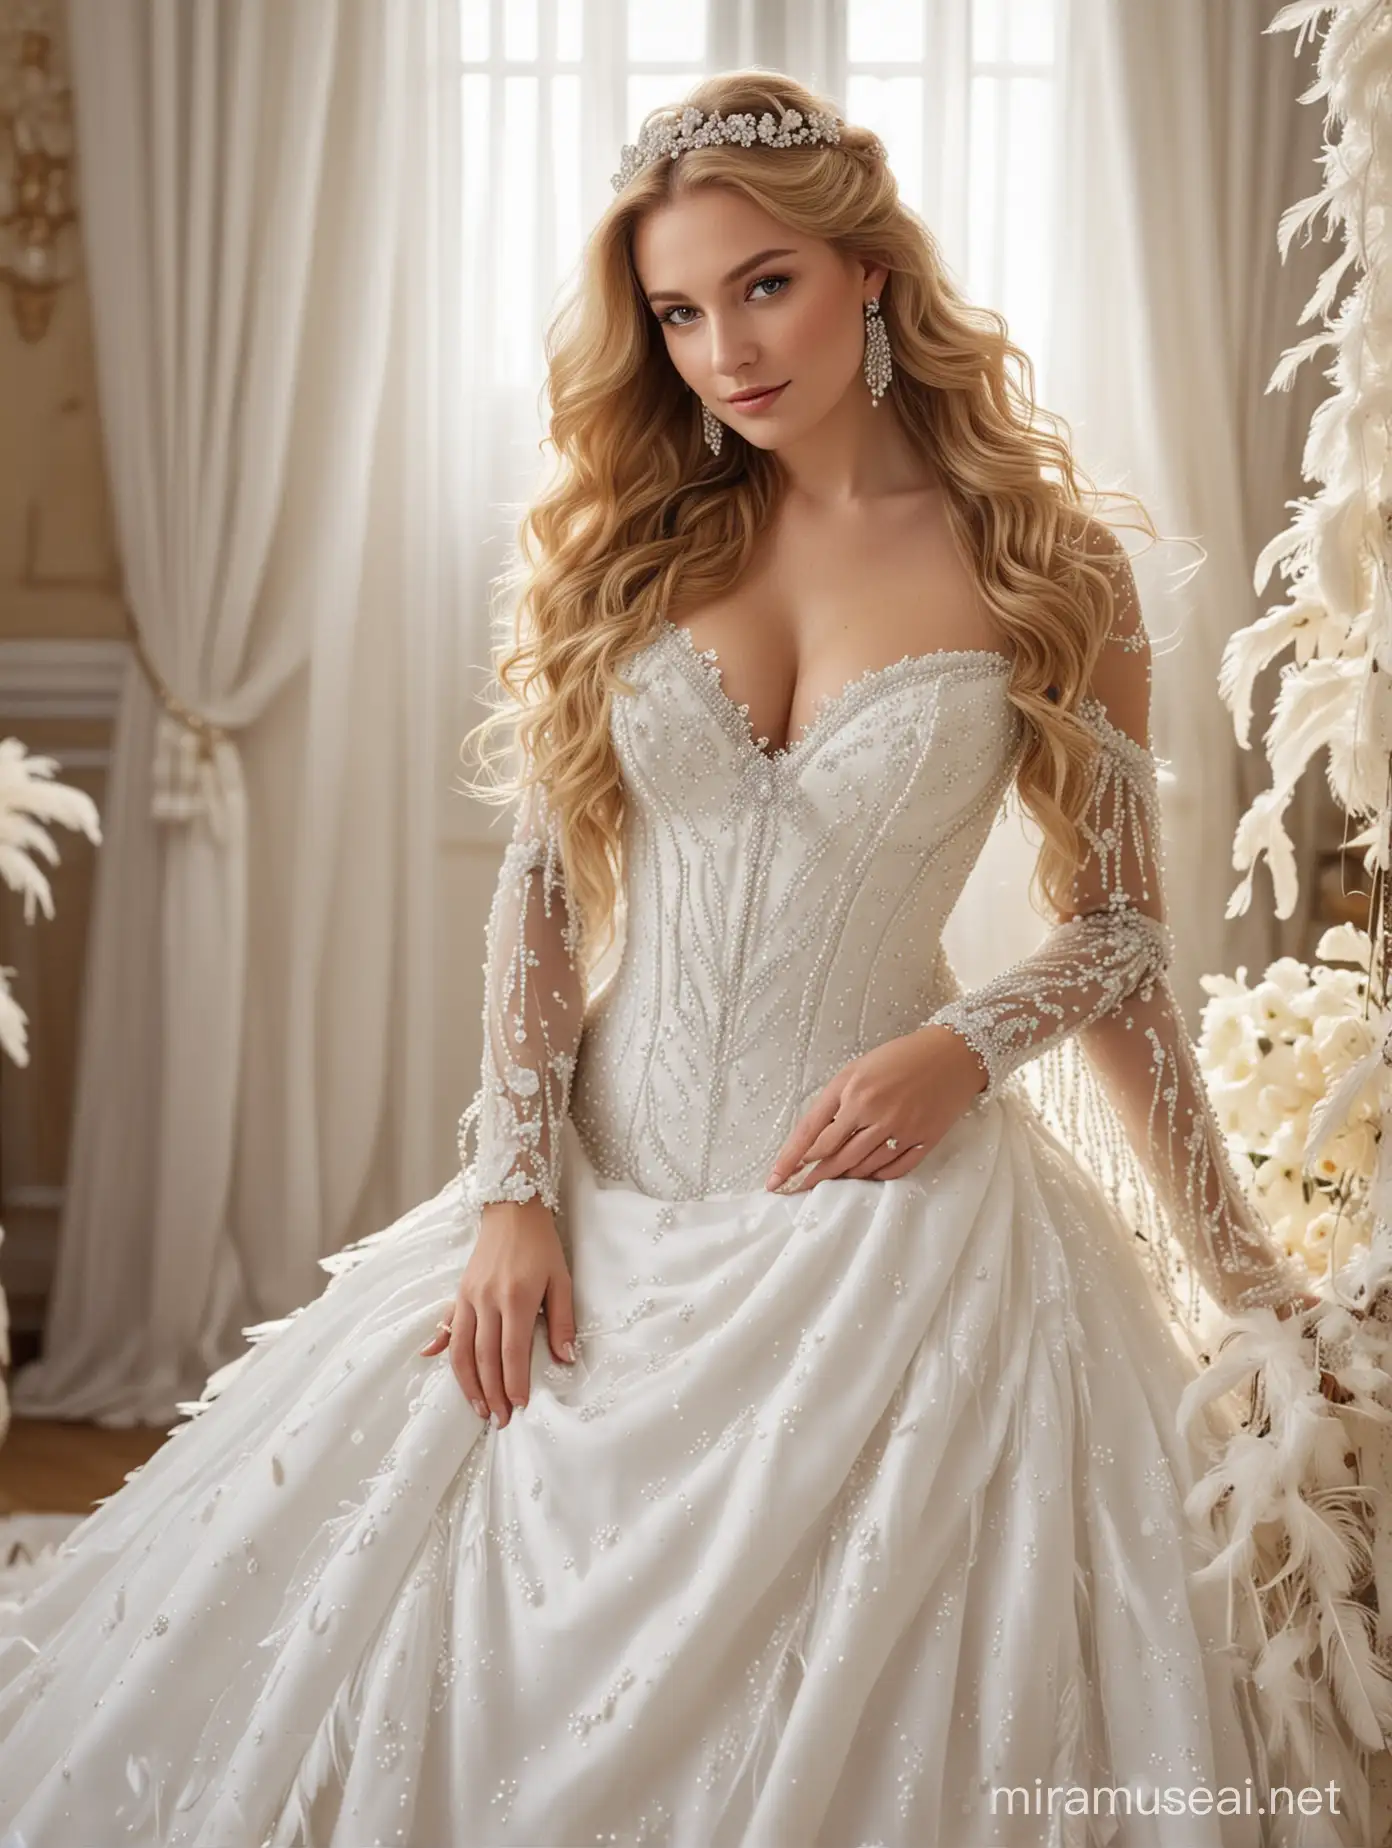 A girl with long golden hair and a curvaceous body in a long wedding dress, full of pearls on the sleeves, small feathers on the sleeves and large pearls on the bottom of the wedding dress, long feathers, bare chest.